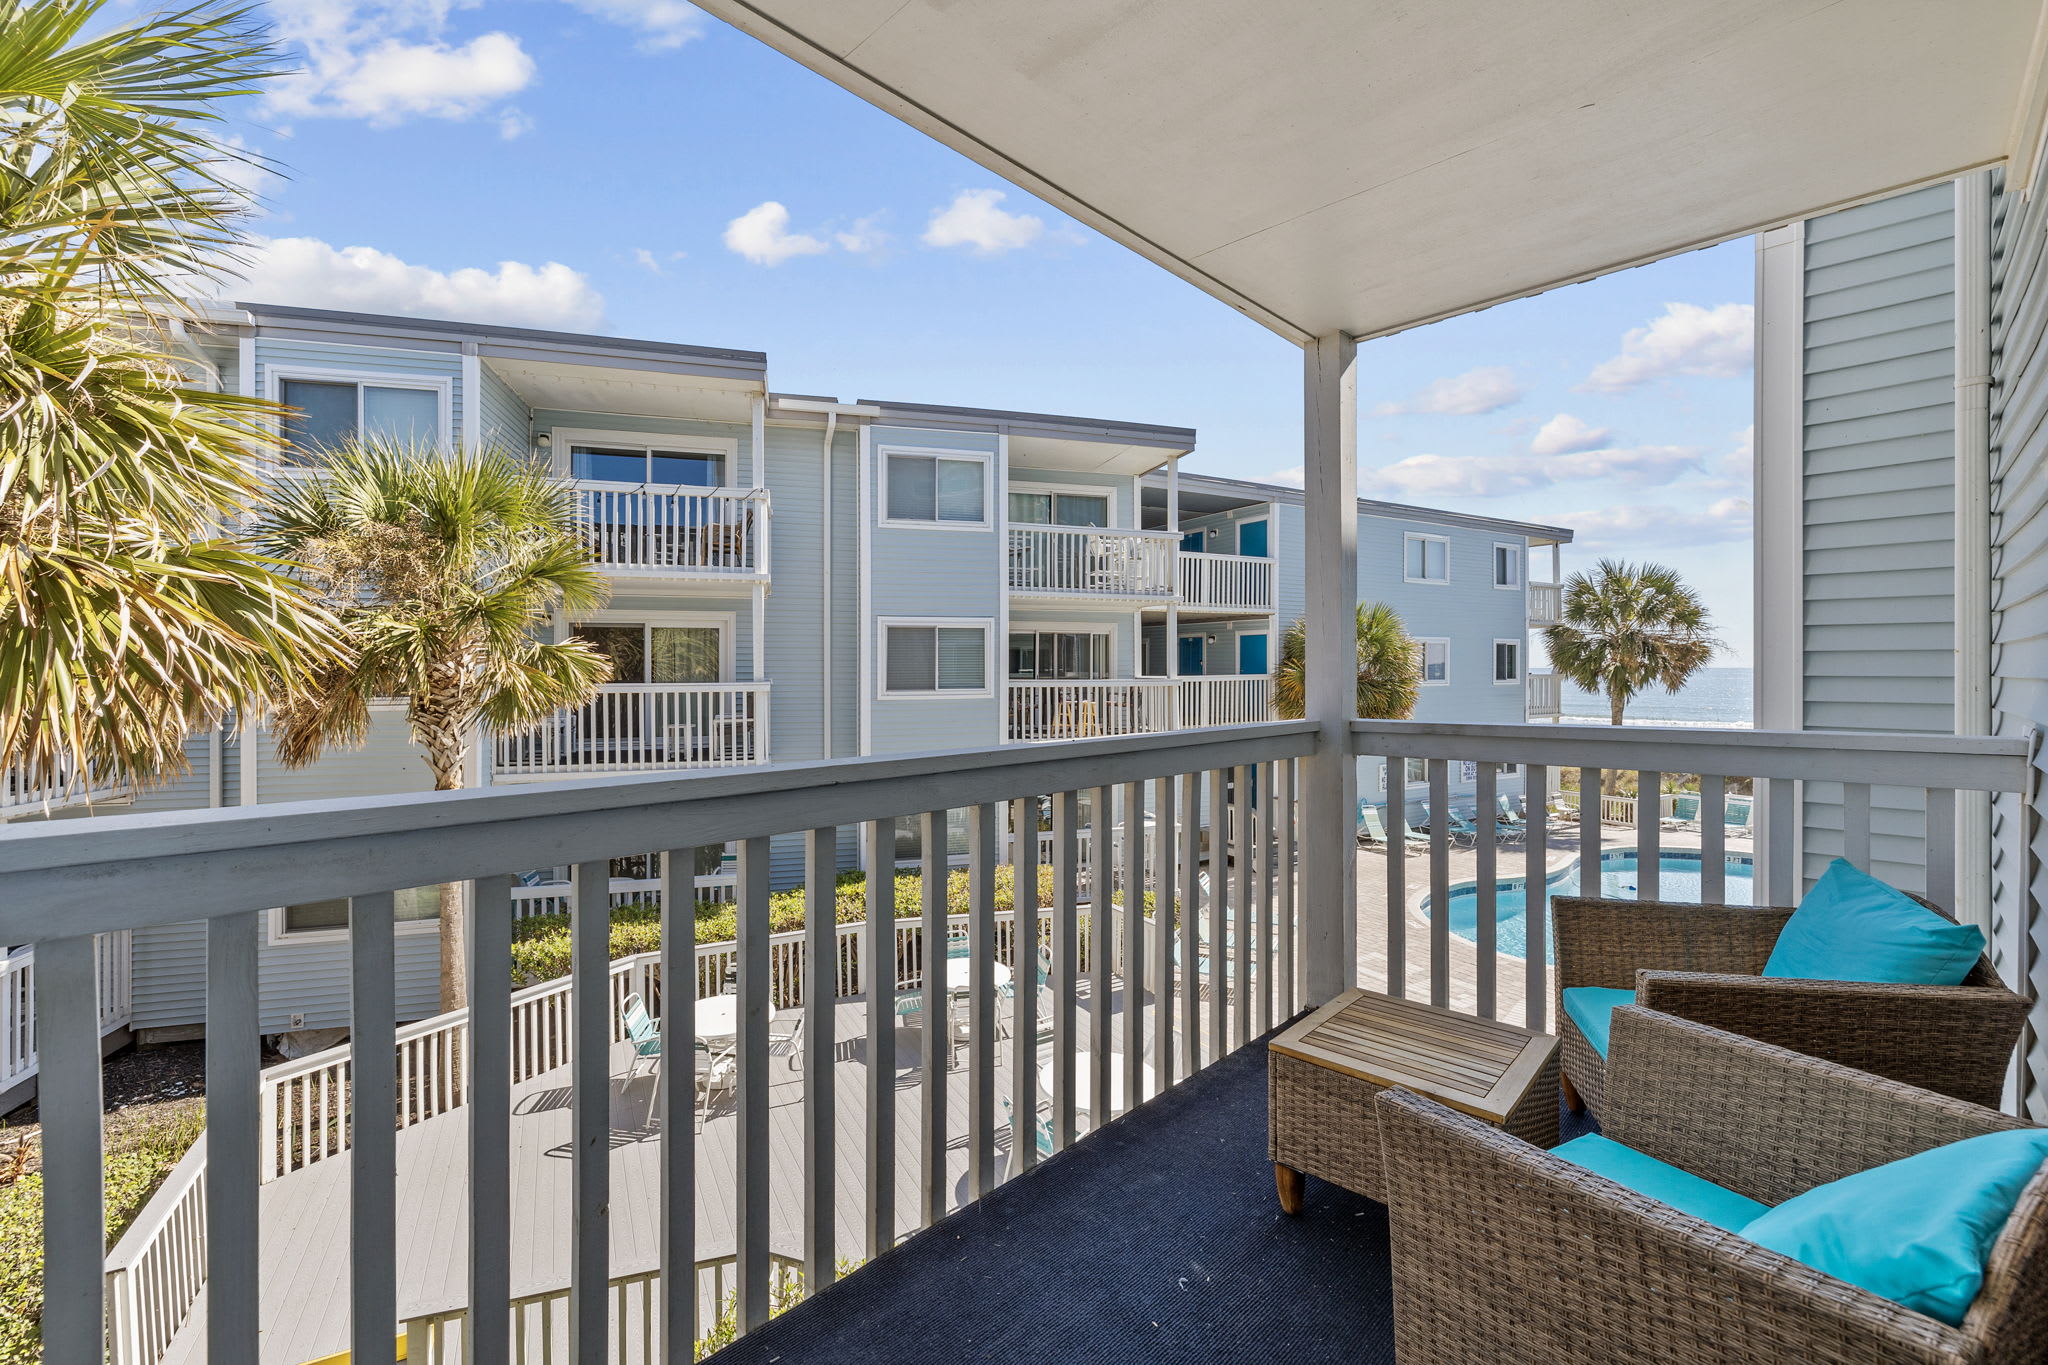 Enjoy this relaxing private balcony overlooking the pool and ocean!